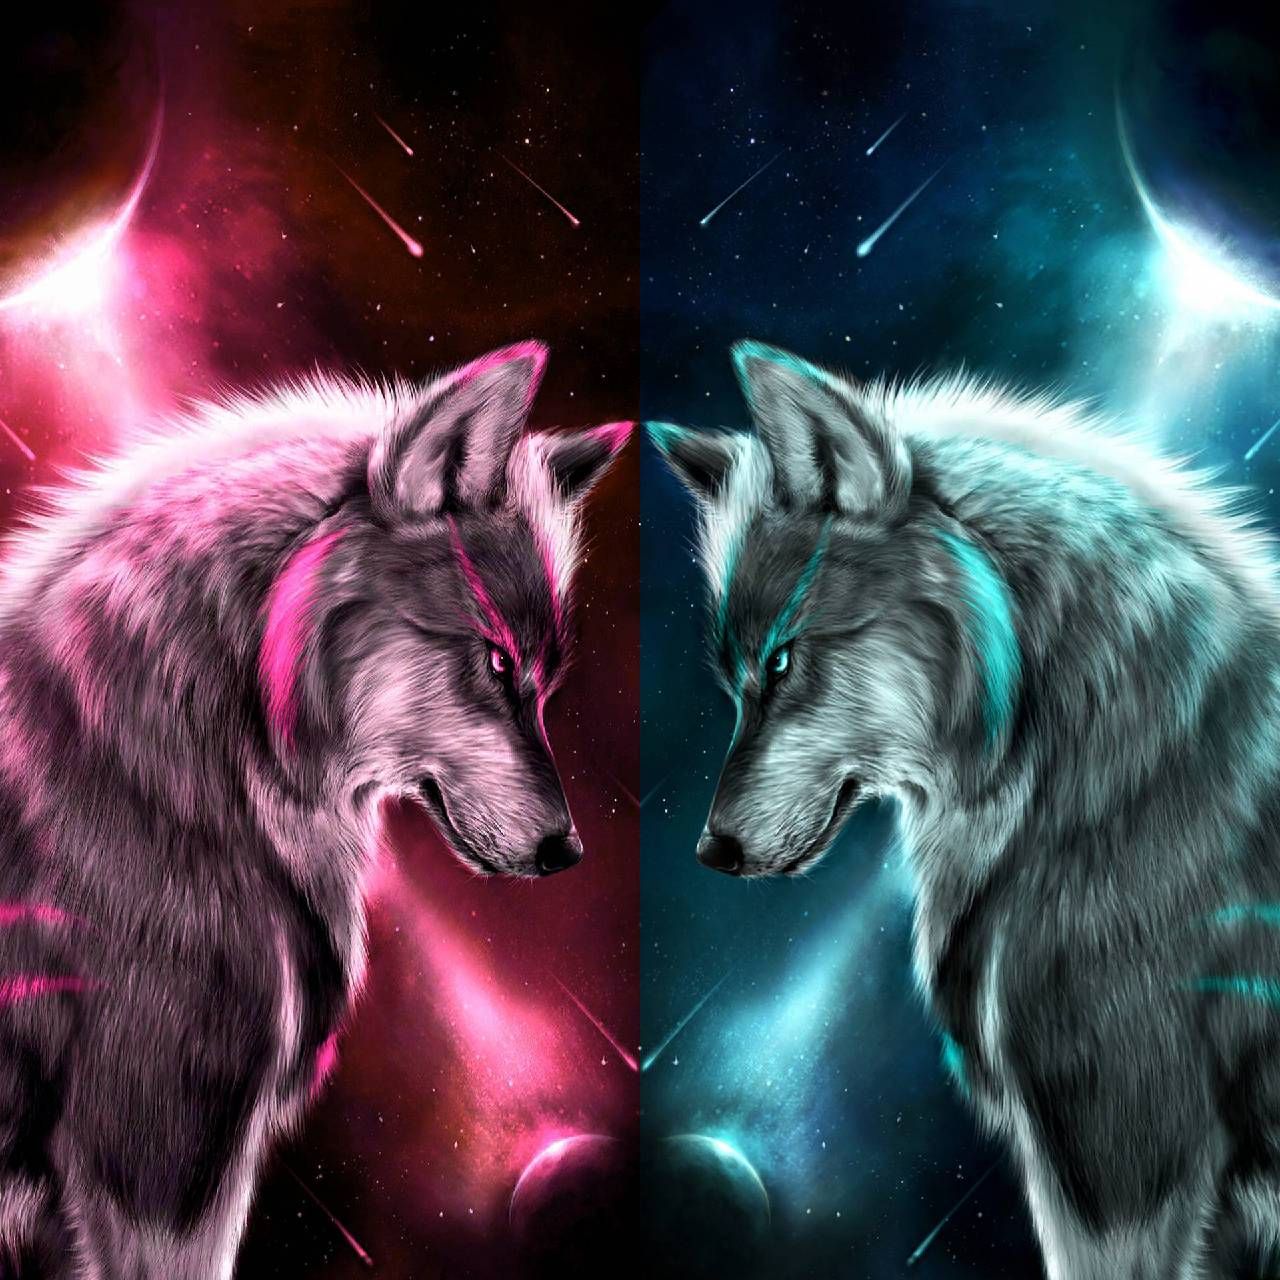 Download Face off Wallpaper by sjbrown489 now. Browse millions of popular lone Wallpaper. Wolf wallpaper, Fantasy wolf, Wolf spirit animal